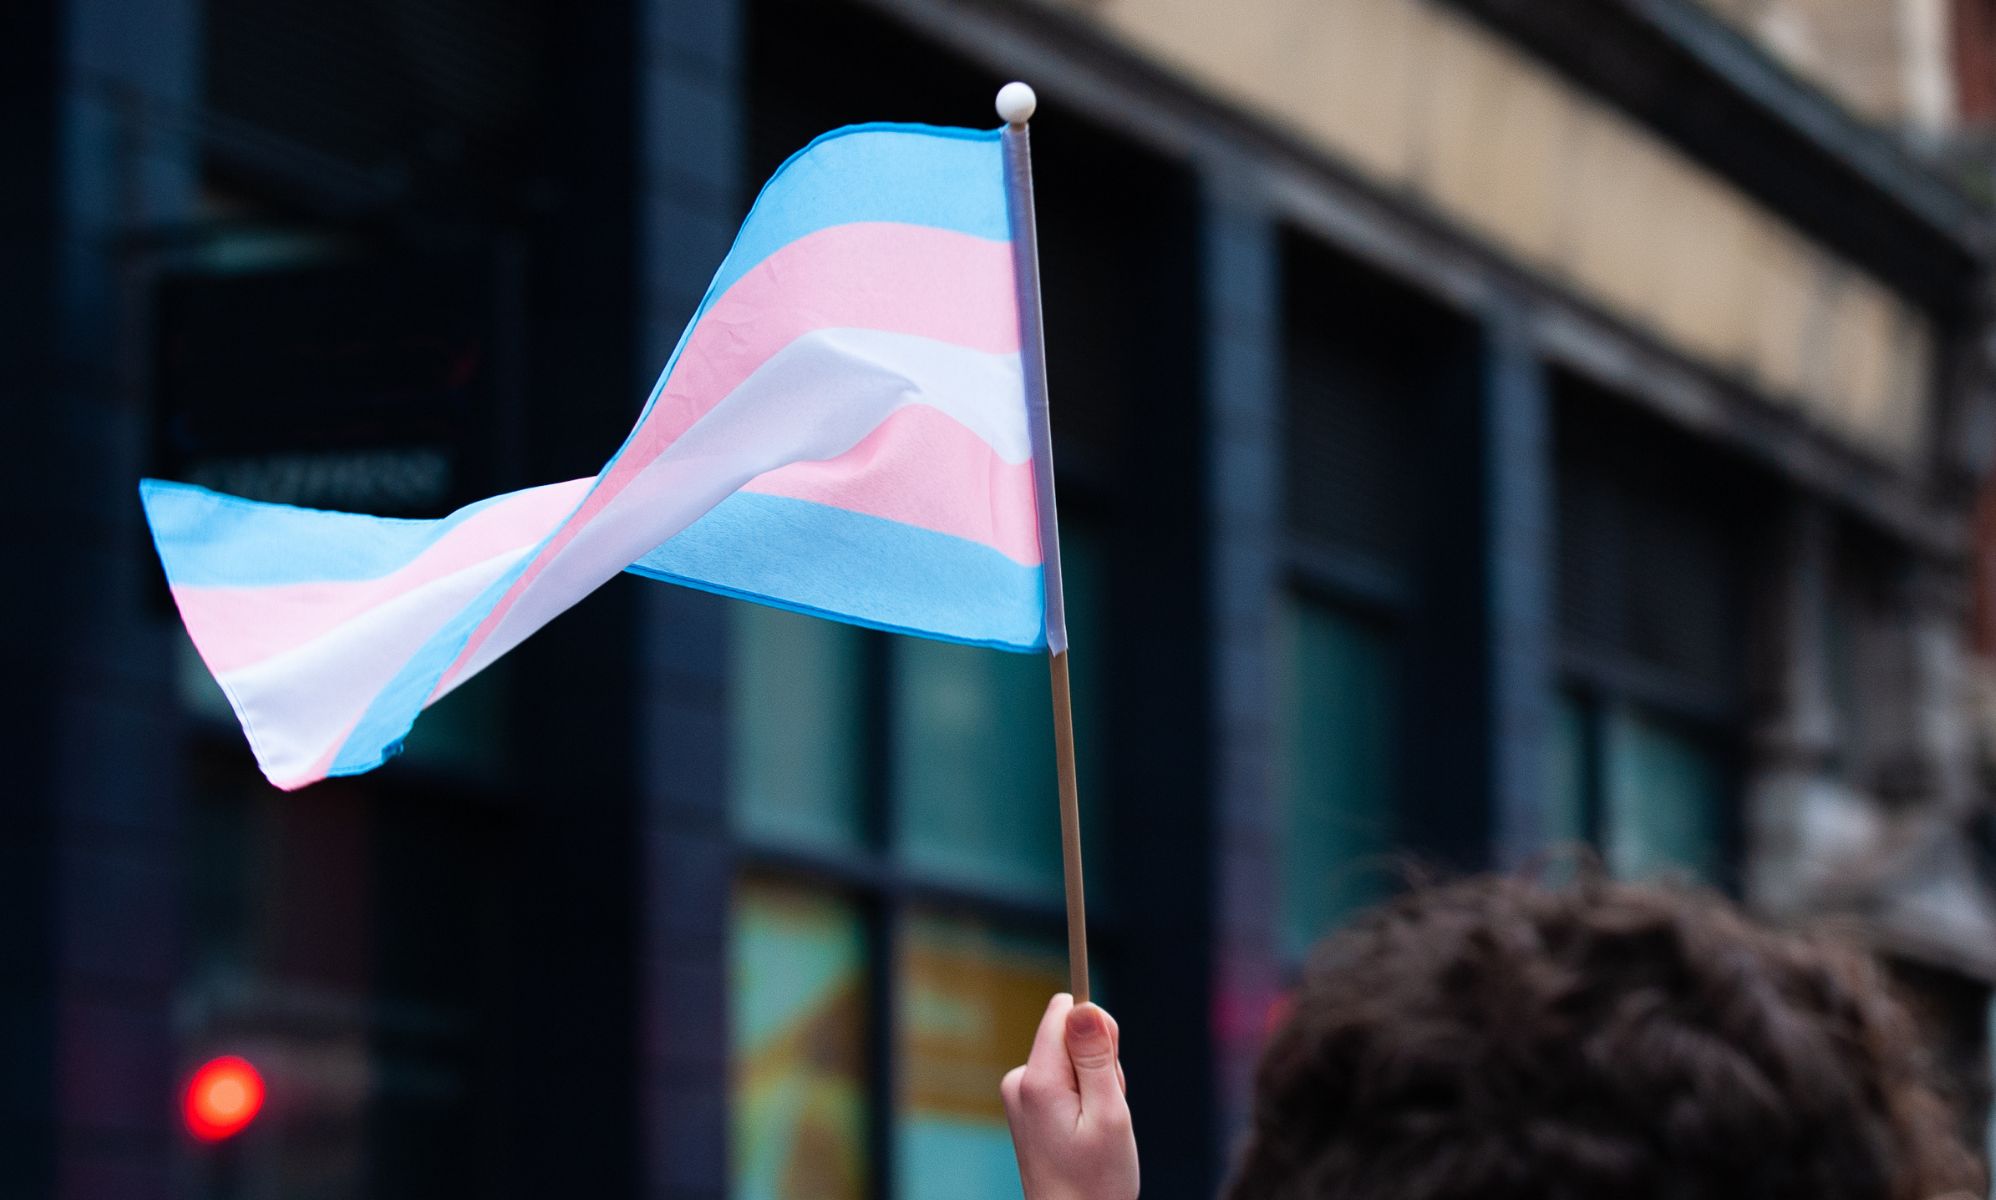 Major trans rights groups unite to take down anti-trans movement